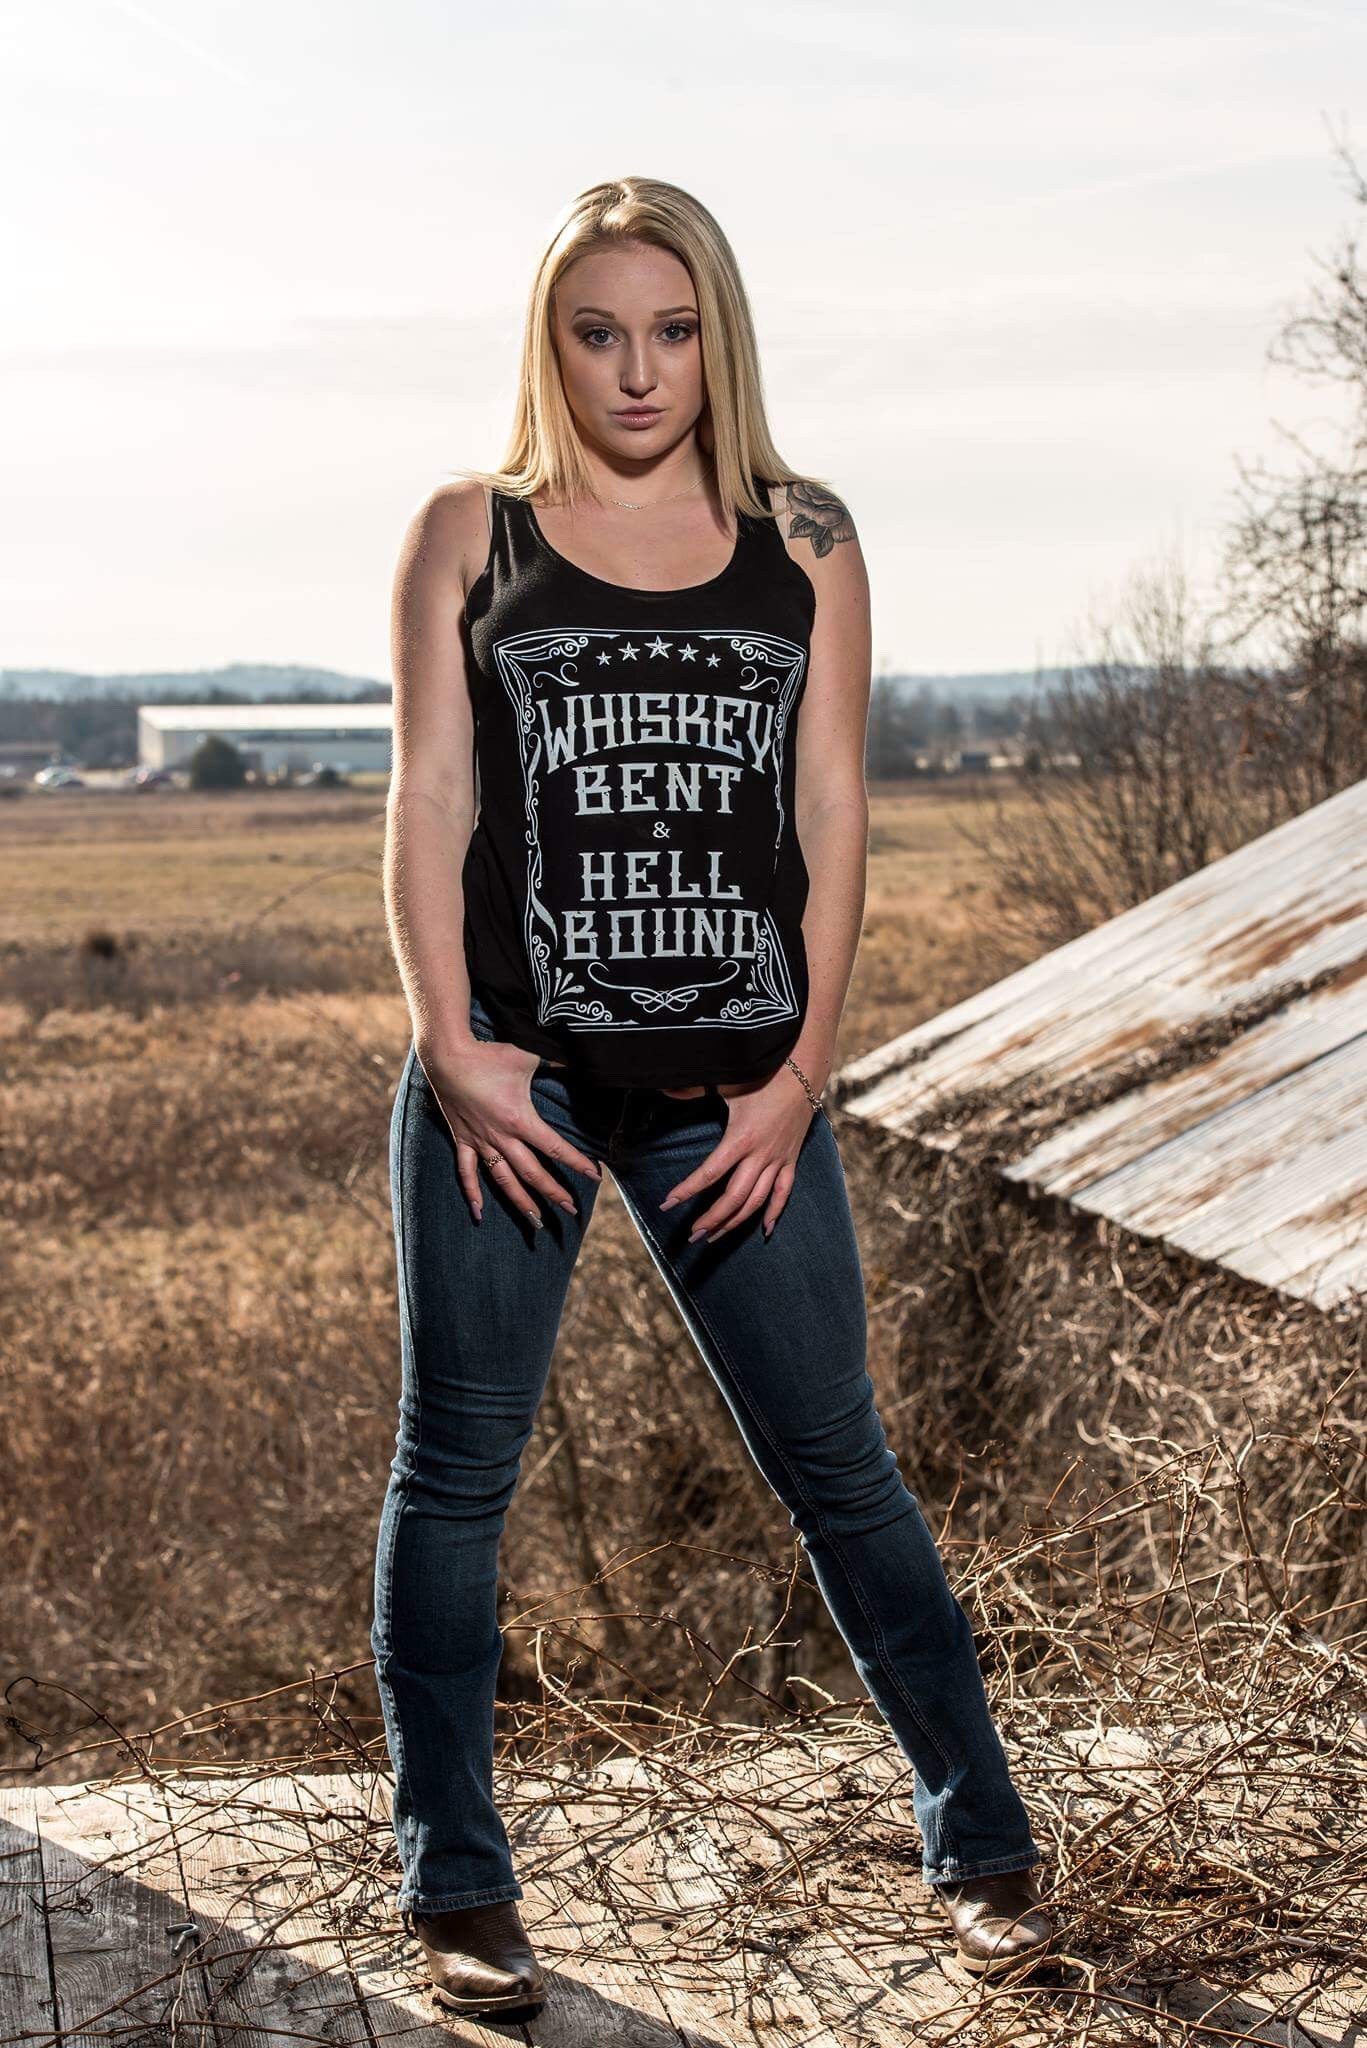 WHISKEY BENT AND HELLBOUND TANK TOP + free item - Trailsclothing.com